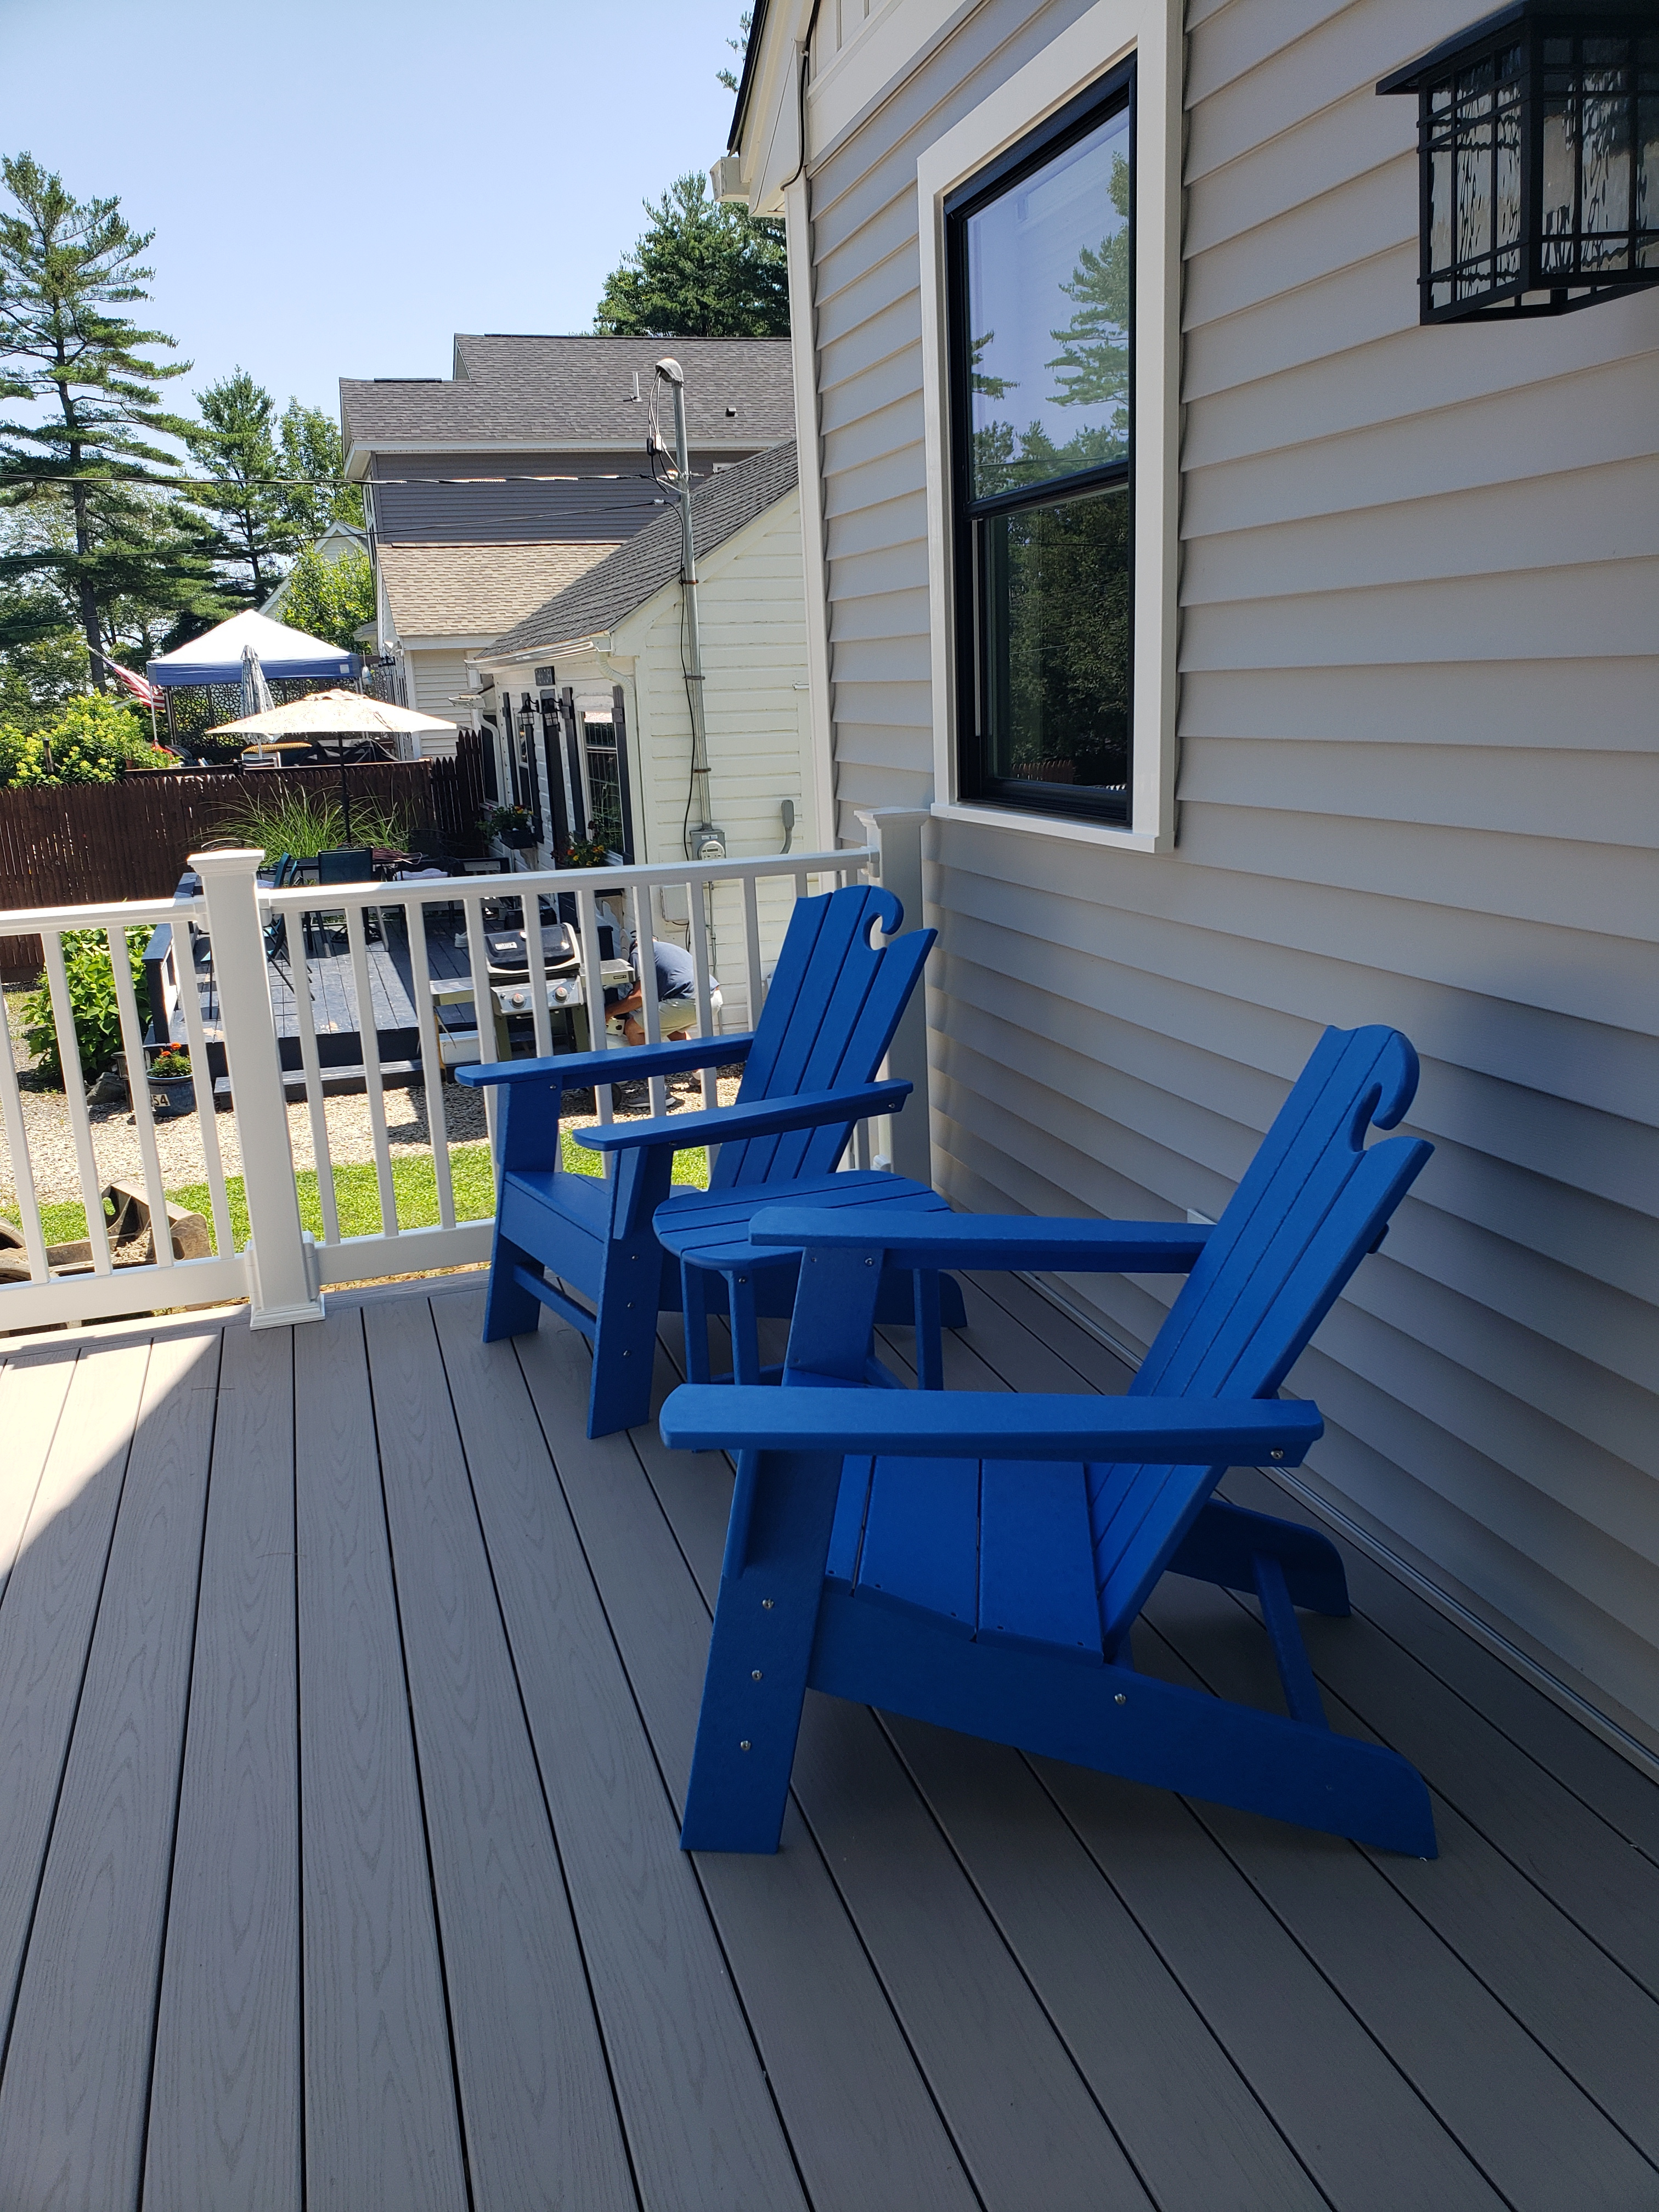 56-BEACON-ST-FRONT-DECK-CHAIRS